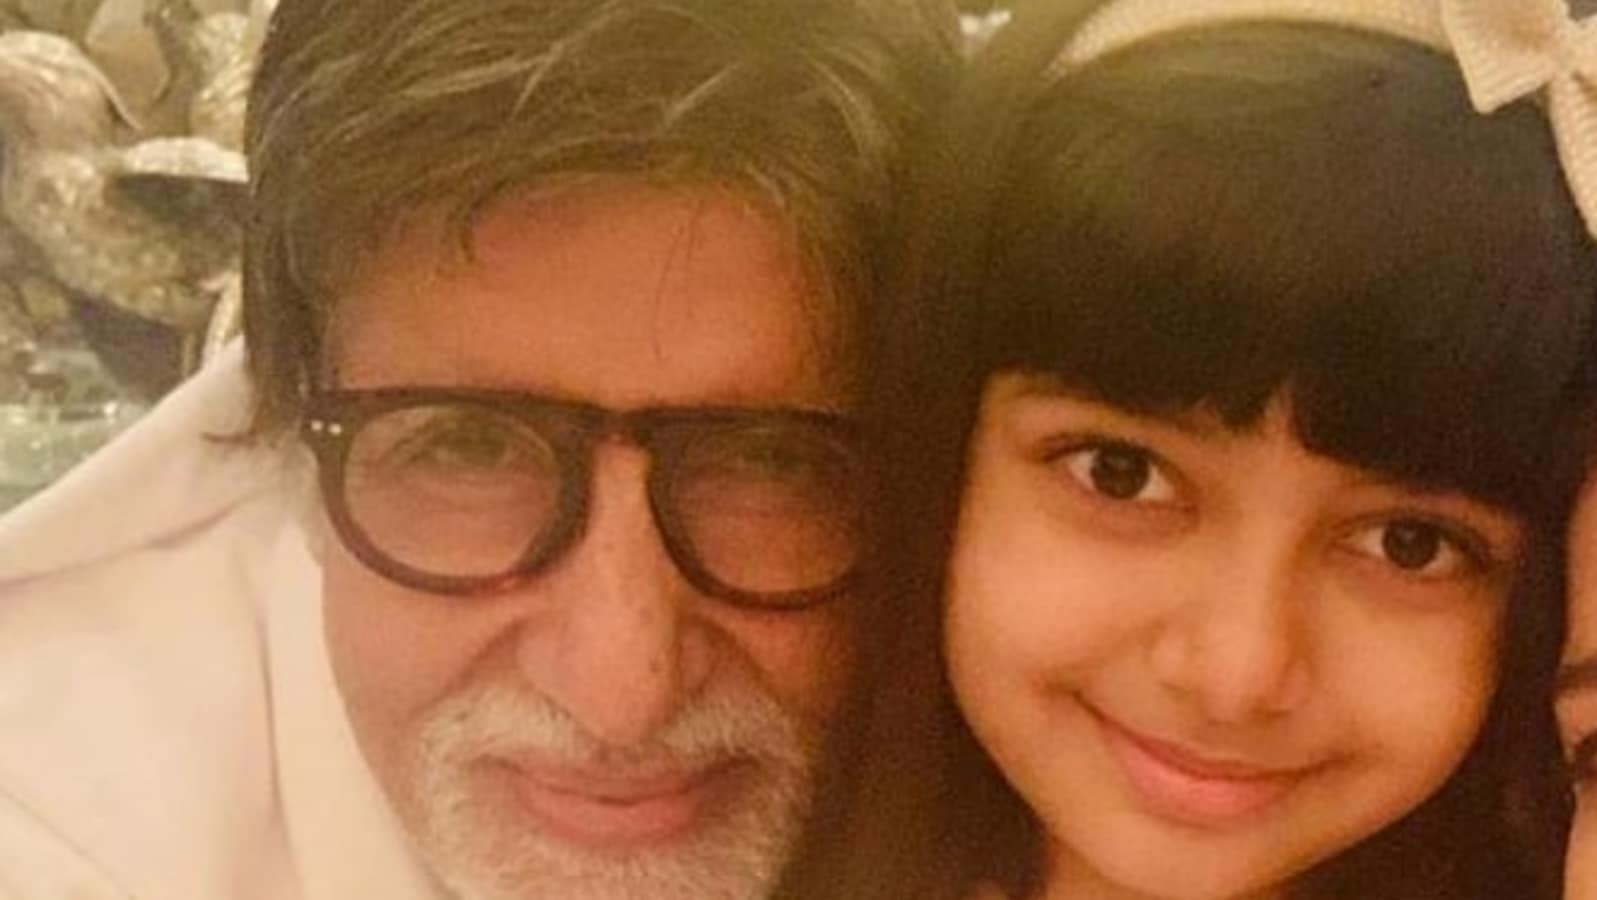 Amitabh Bachchan says he gets ‘very little time’ with Aaradhya due to his work